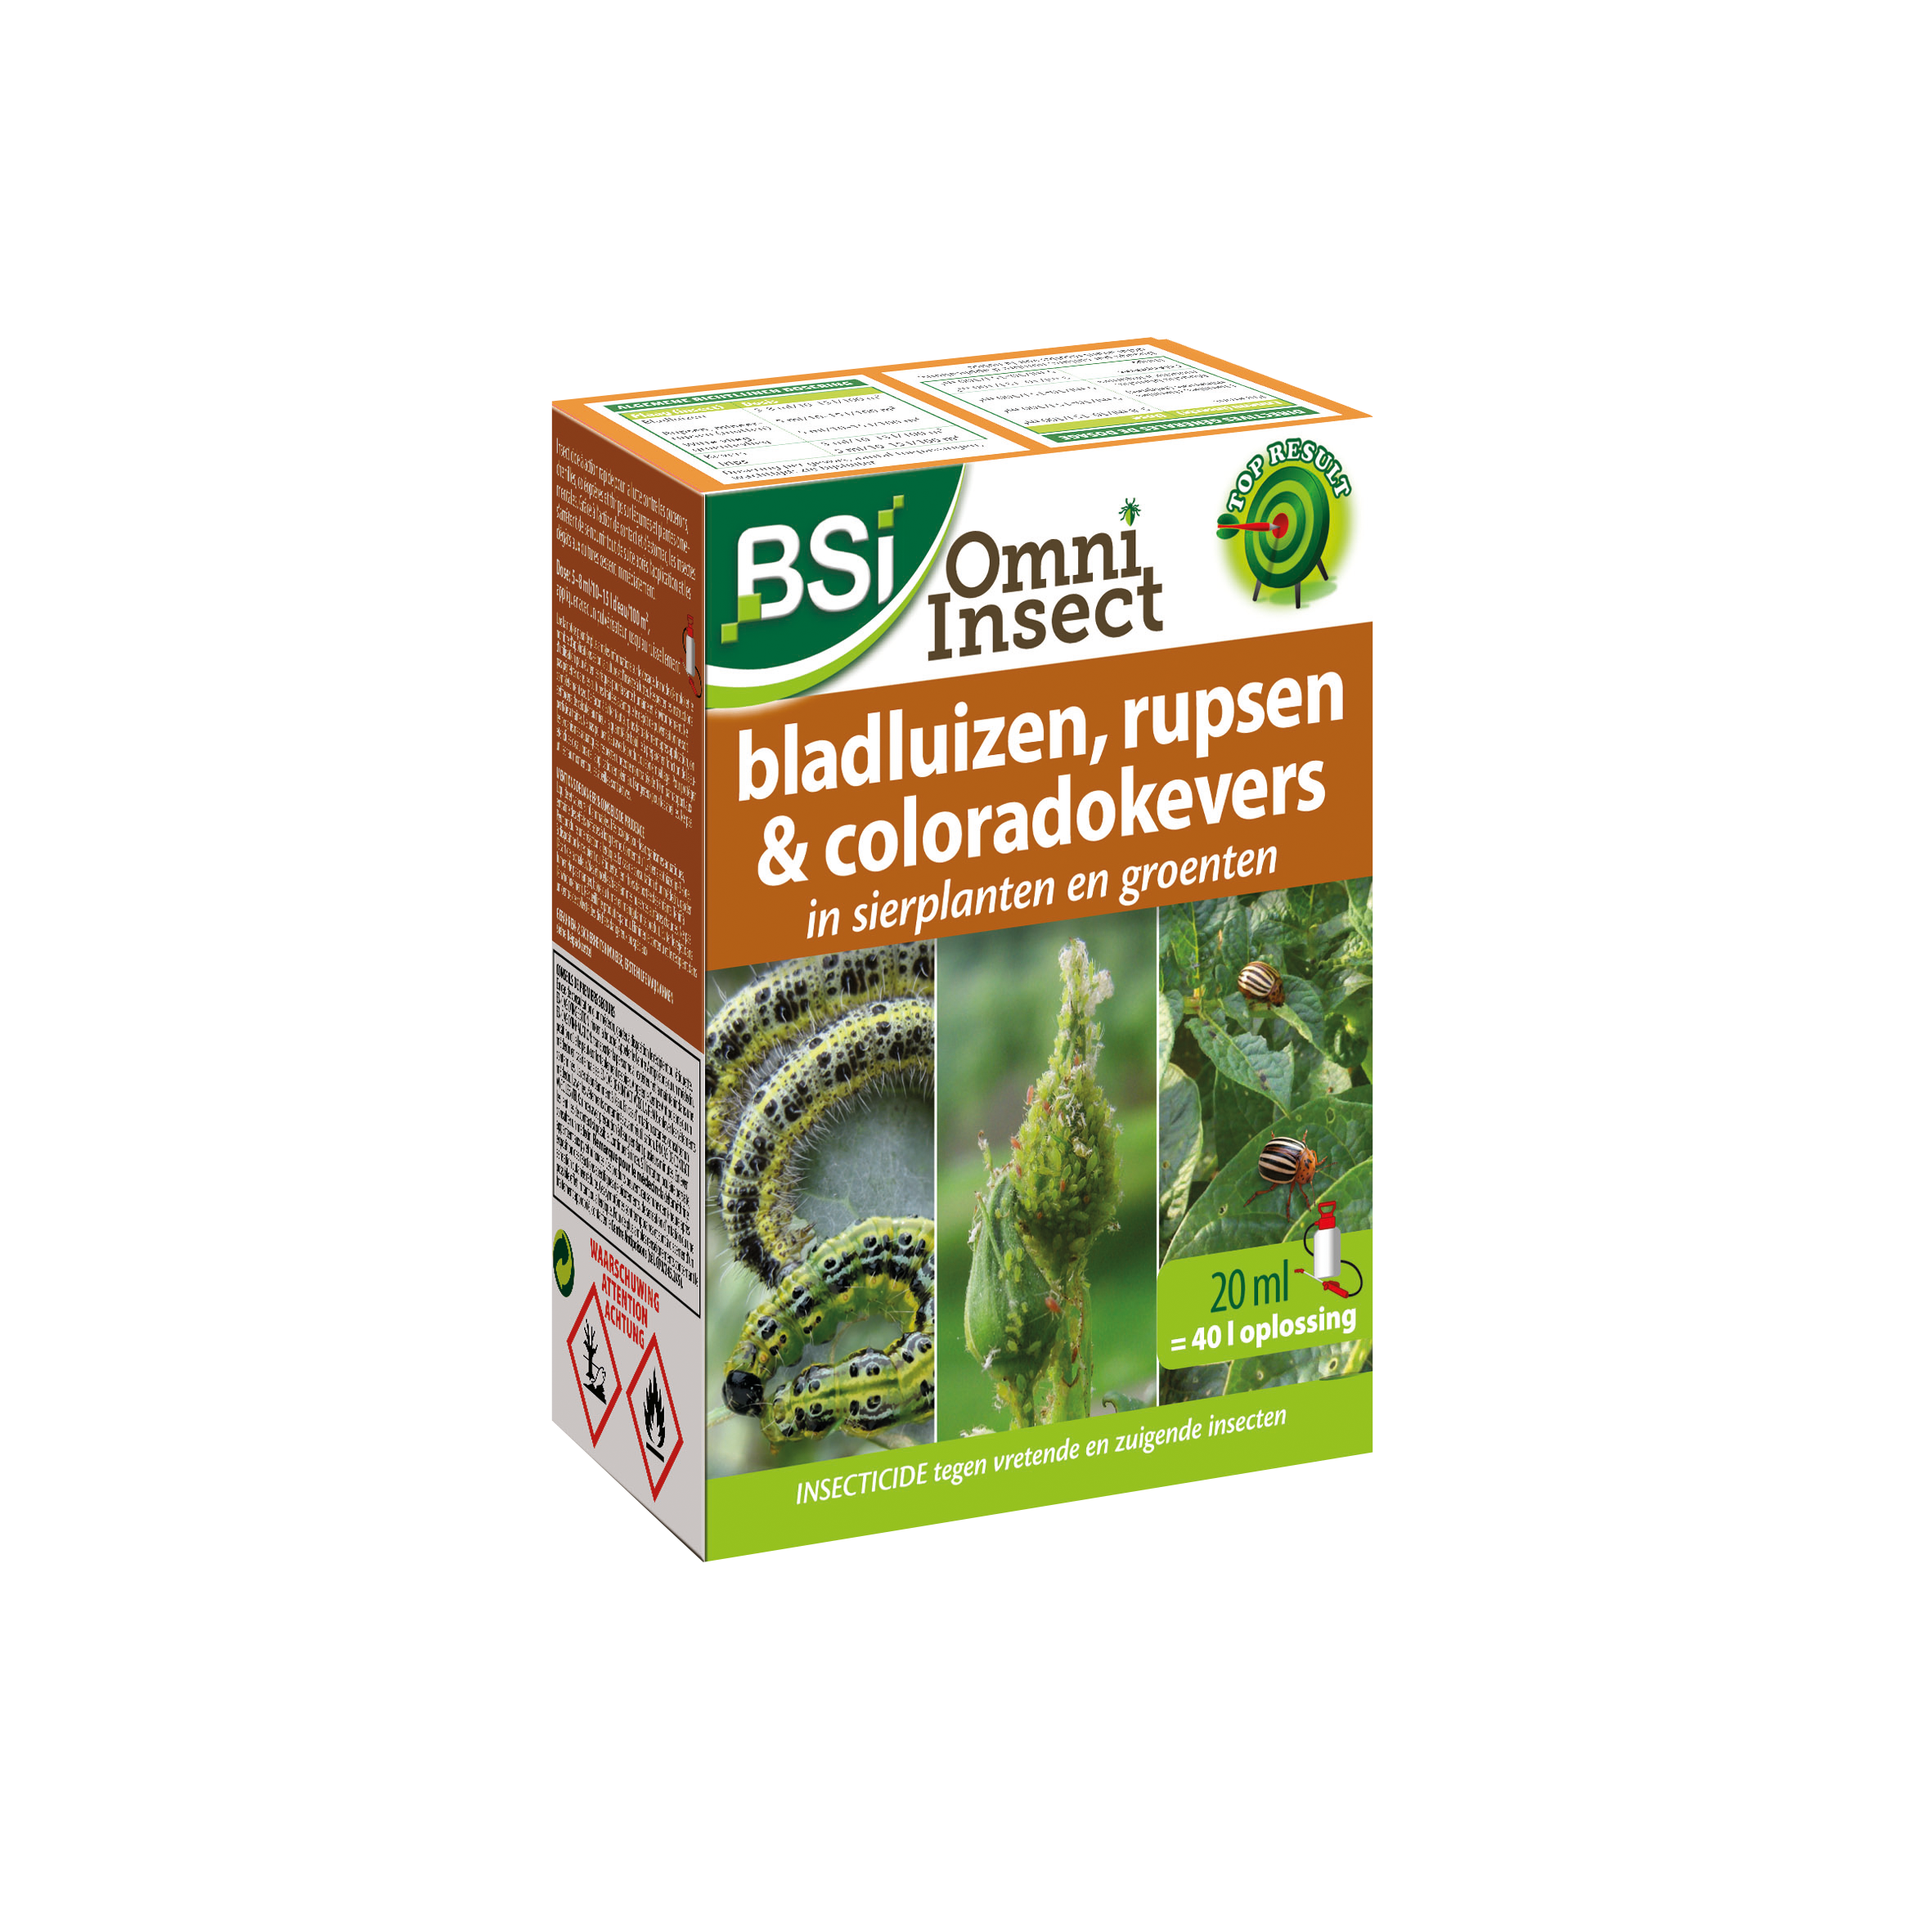 BSI Omni Insect BE 20 ml (1185G/P) image